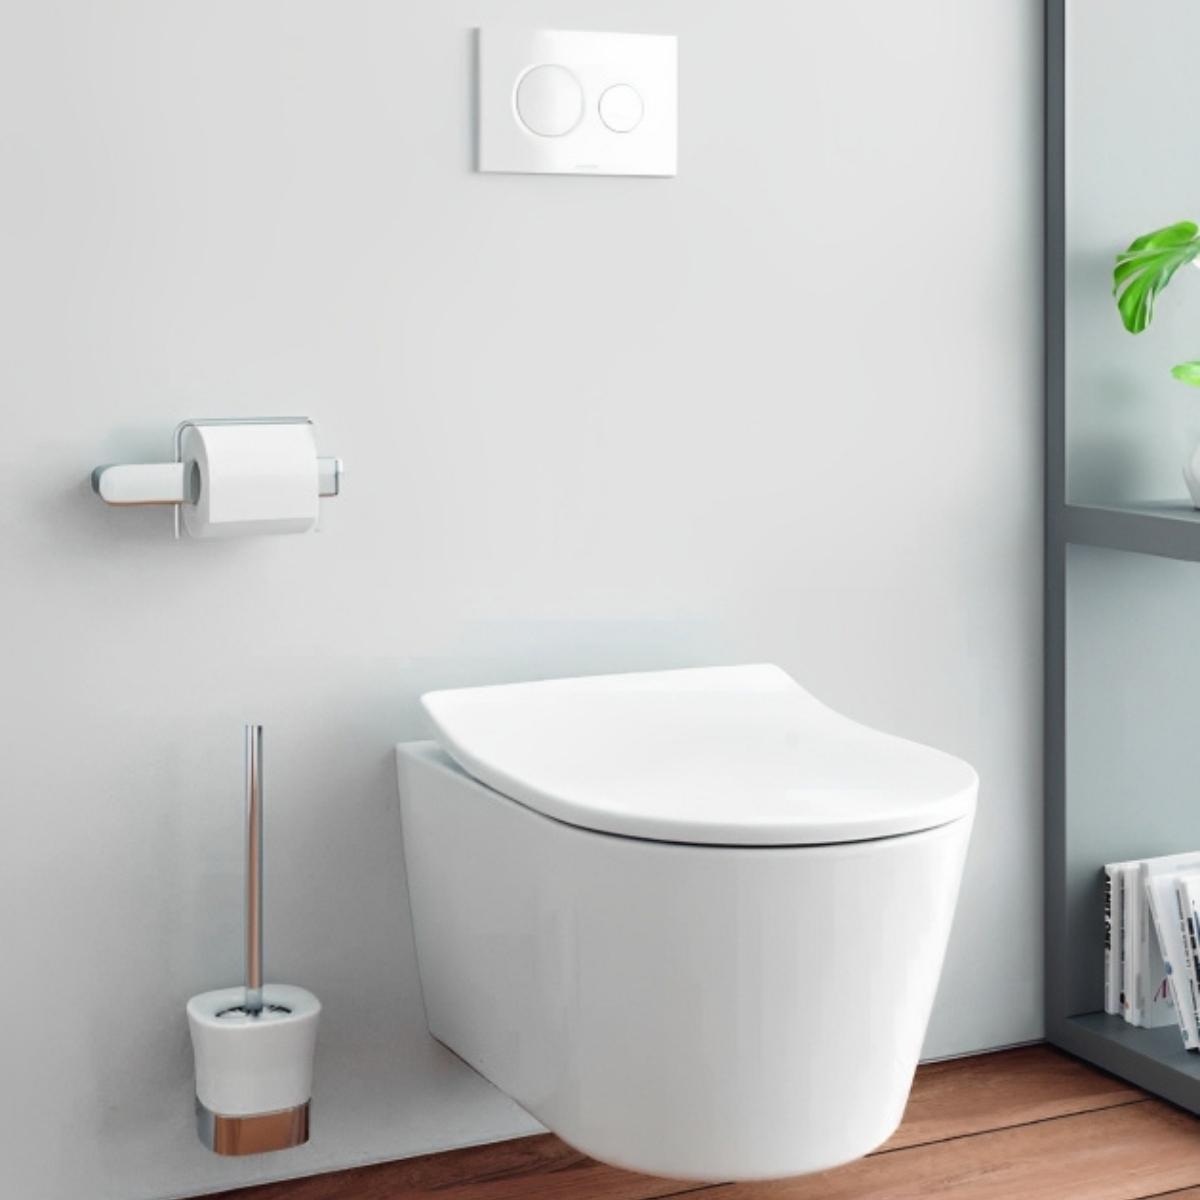 TOTO CONTEMPORARY I WALL HUNG TOILET (D-SHAPE) GLOSS WHITE